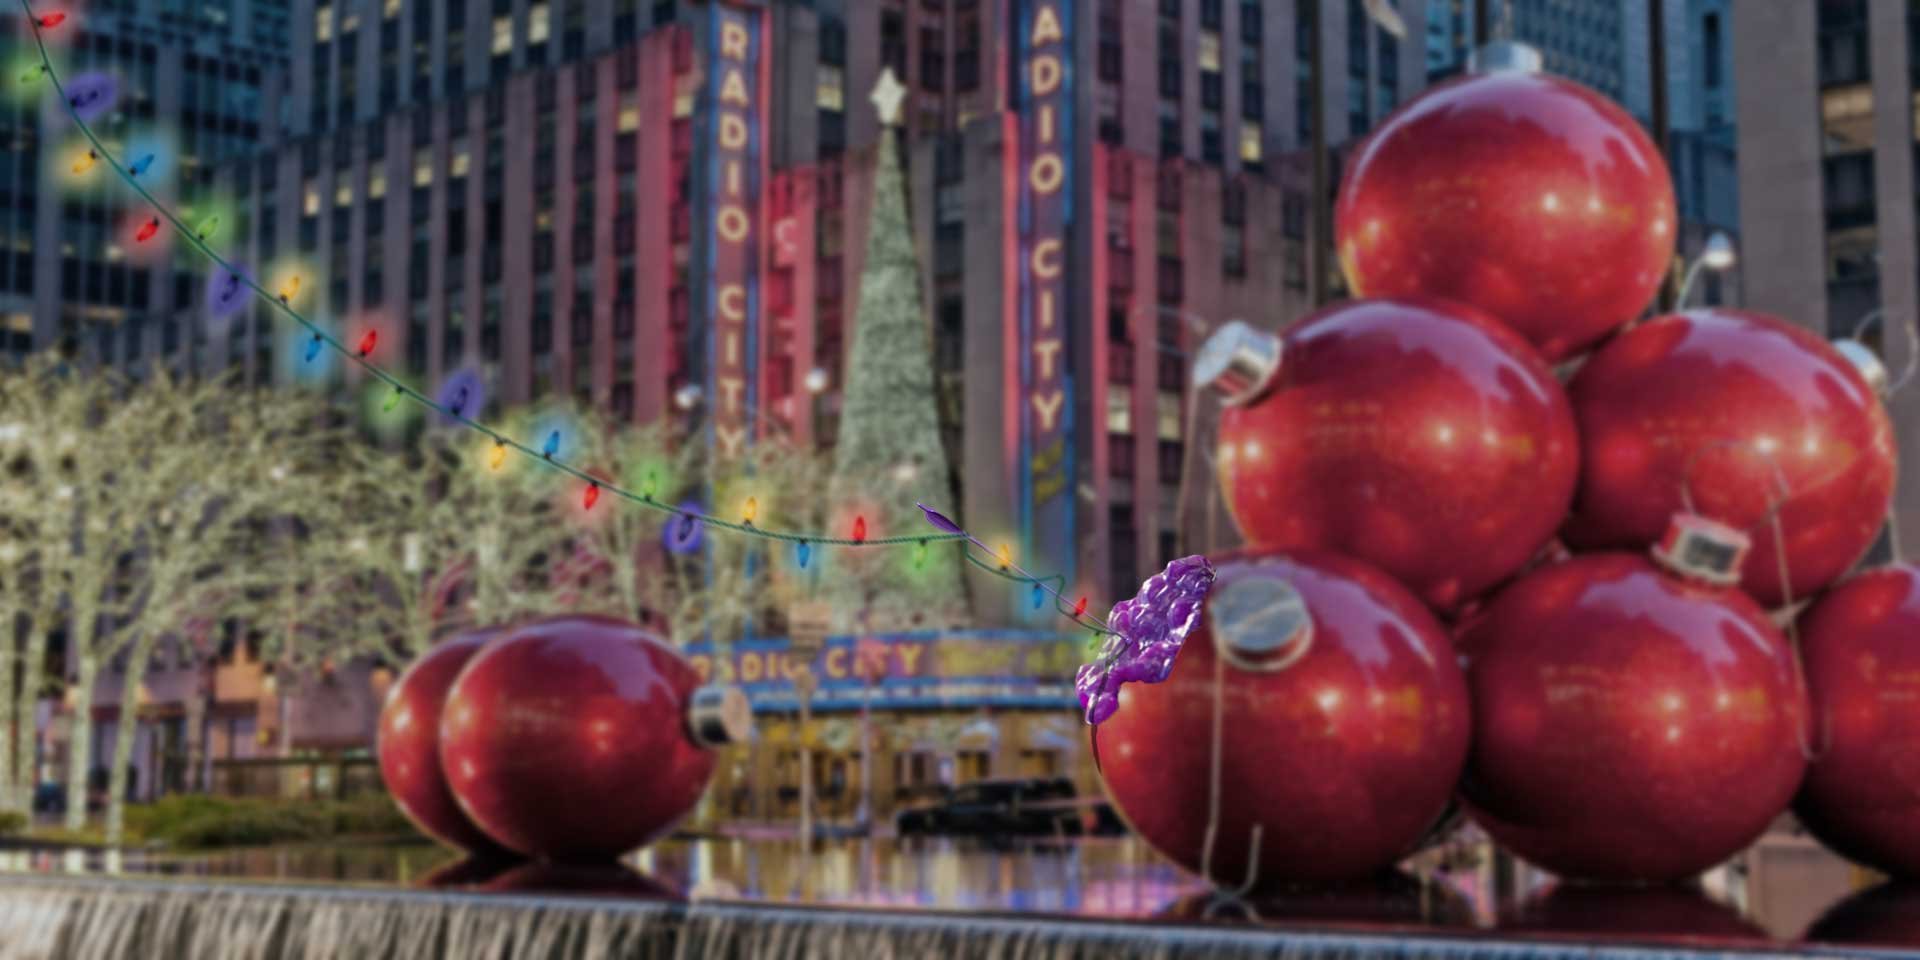 the radio city christmas baubles are an iconic NYC Christmas feature.